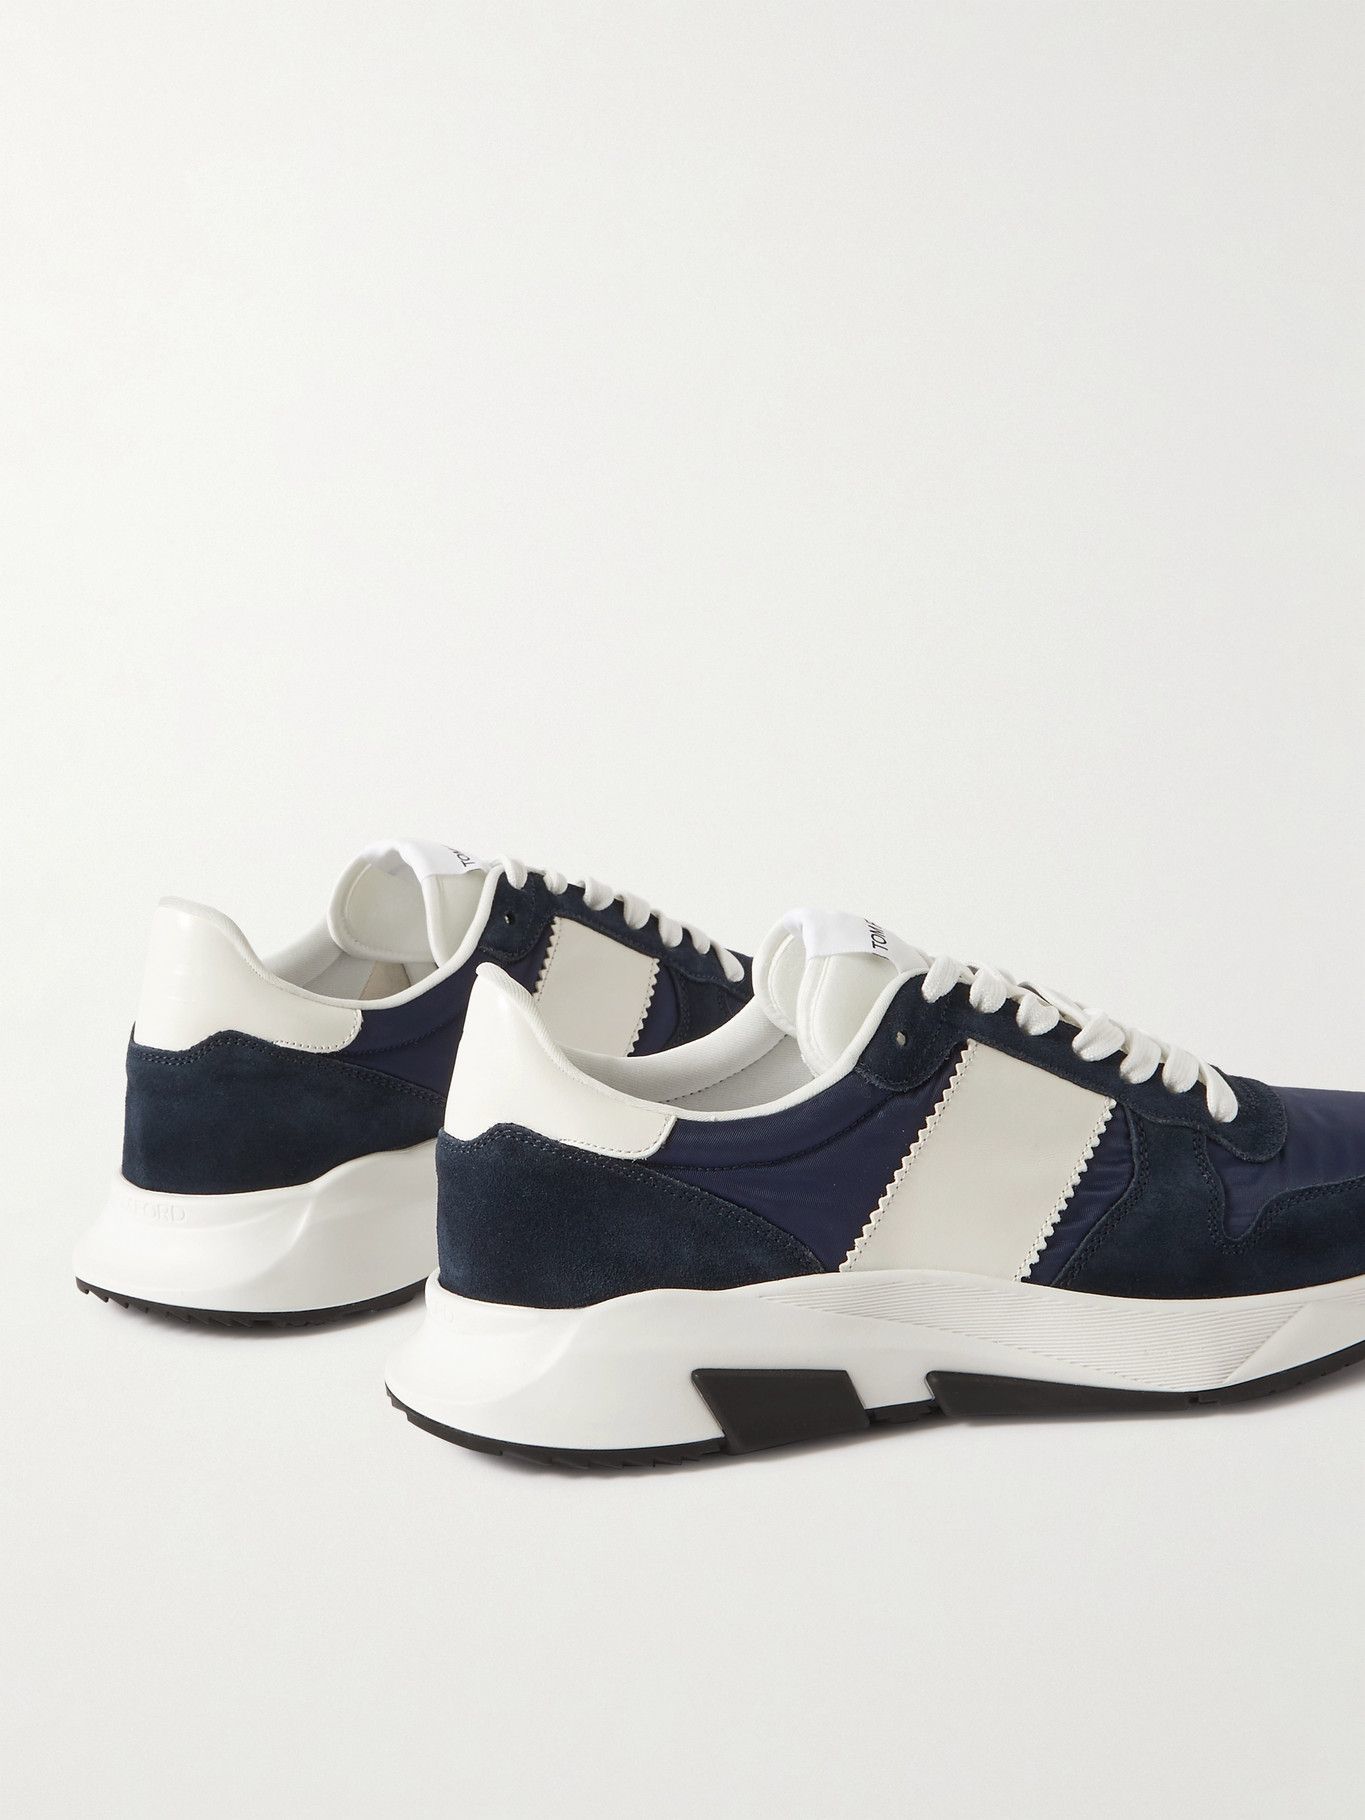 TOM FORD - Jagga Leather-Trimmed Nylon and Suede Sneakers - Blue TOM FORD